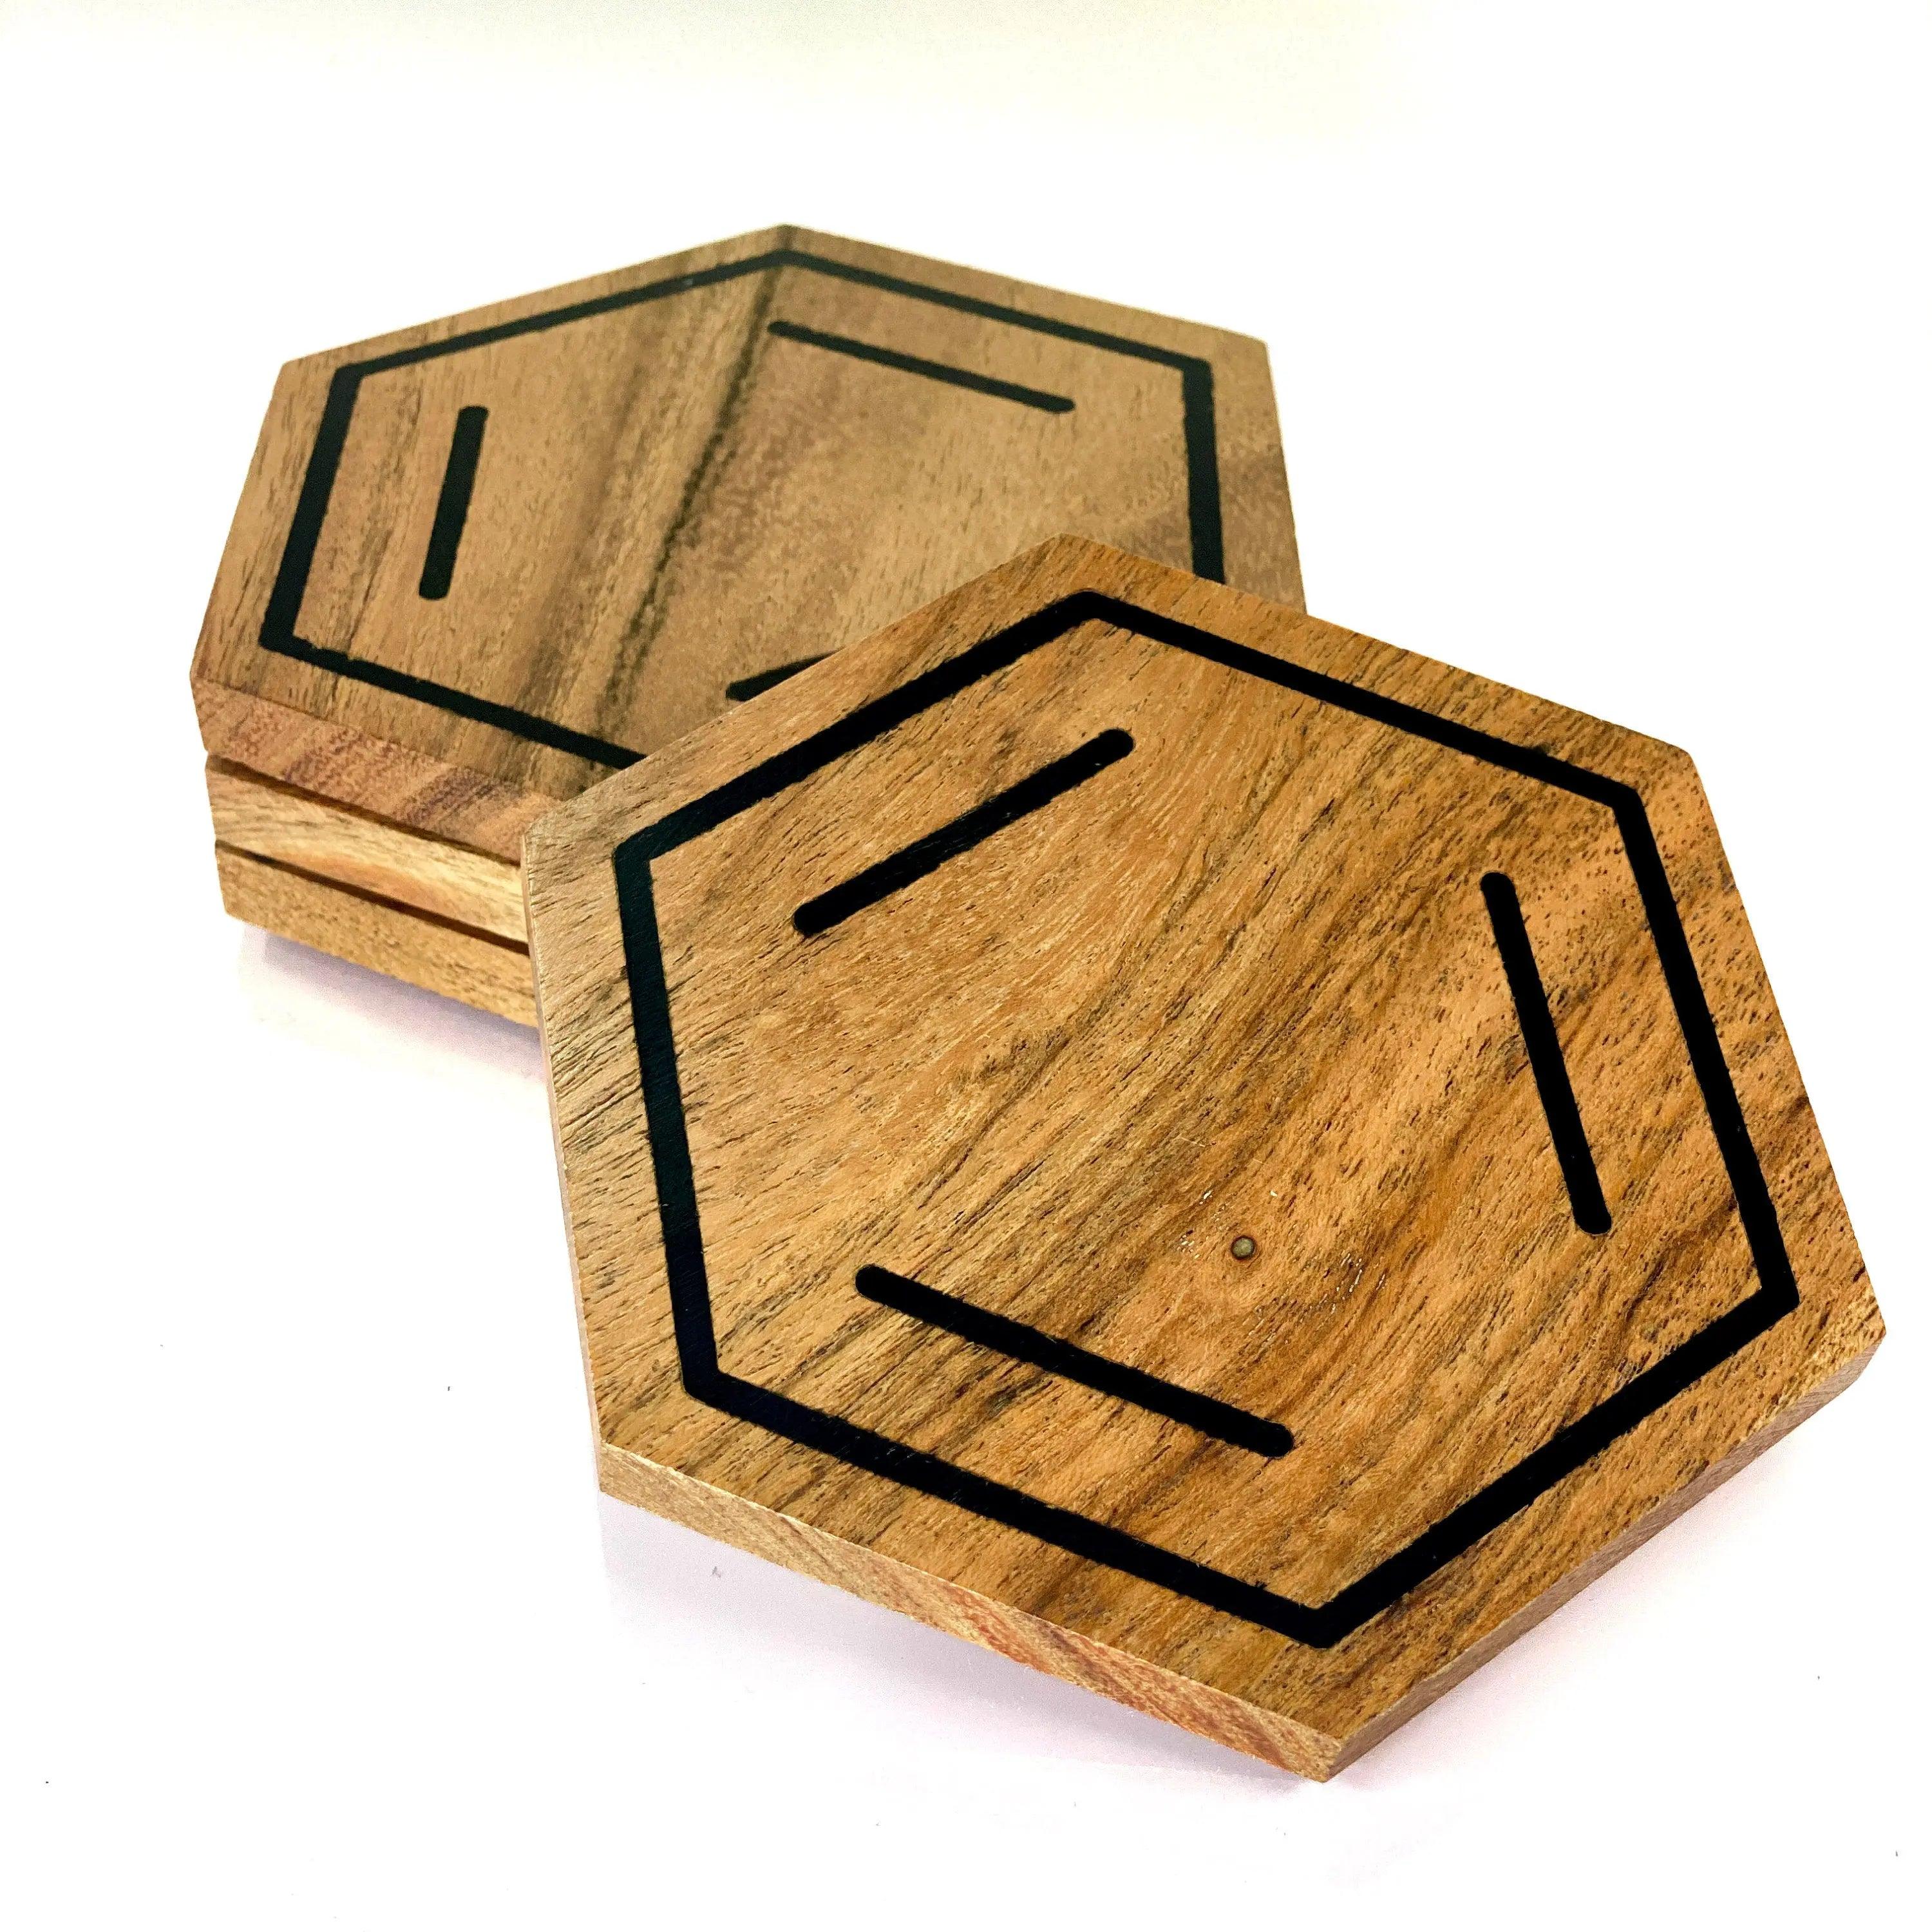 https://thecalculatedchemist.com/cdn/shop/files/Natural-Wood-and-Resin-Chemistry-Coaster-Set-of-4---Science-and-Chemistry-Gifts-thecalculatedchemist-1692753358446_5b05bf63-2549-4bdc-8248-34ec1619c782.jpg?v=1692753412